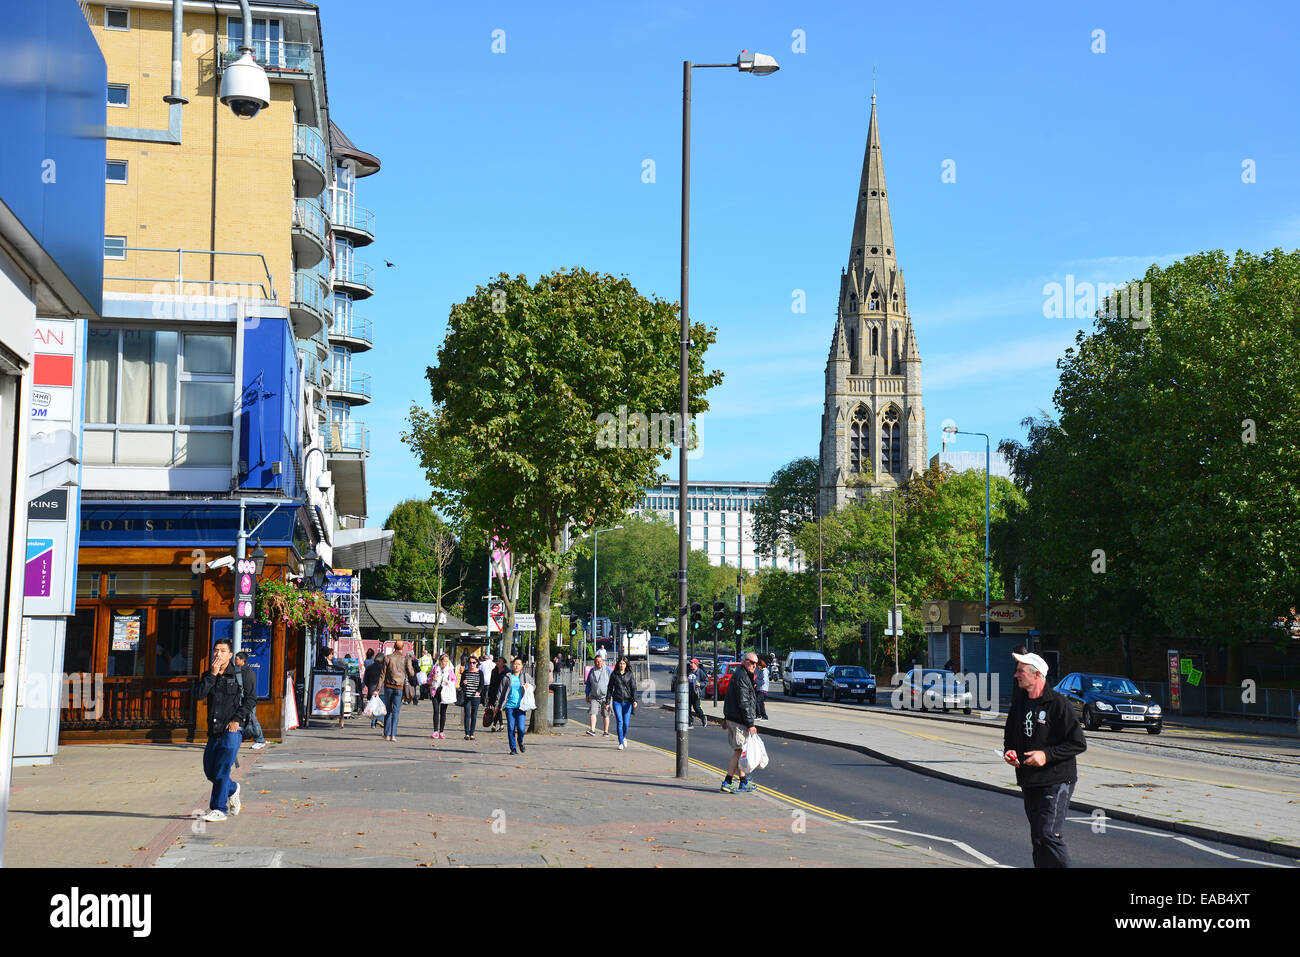 High Street, Feltham, London Borough of London, Greater London, Angleterre, Royaume-Uni Banque D'Images